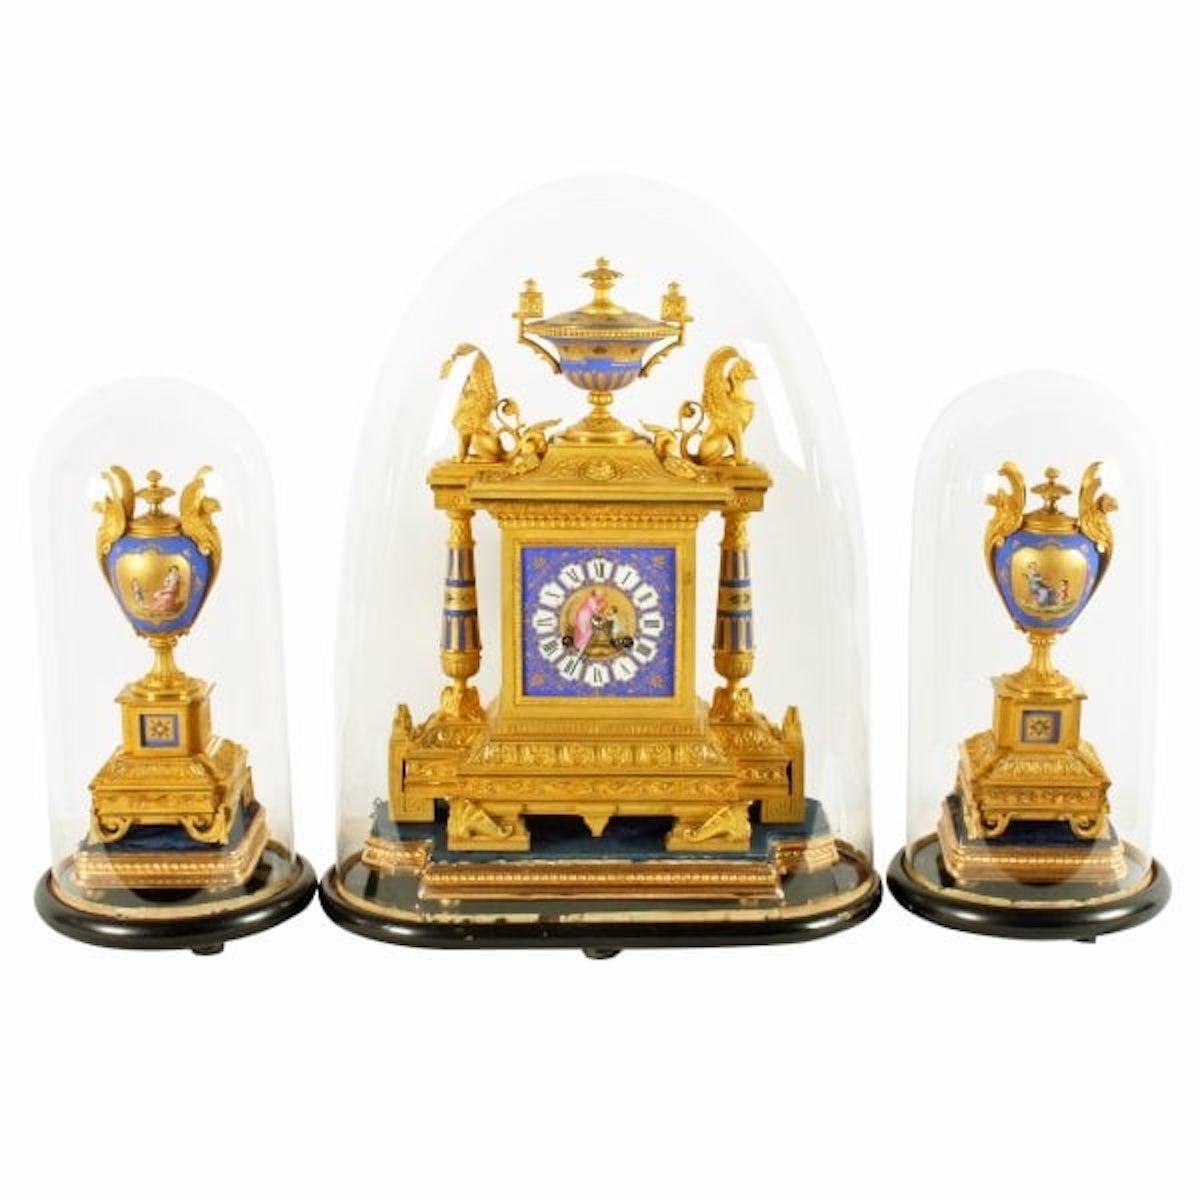 French Ormolu & porcelain clock garniture

A 19th century Napoleon III French Sévres style ormolu and porcelain three piece clock garniture.

The clock and side ornaments sit on velvet and gilt wood plinths which in turn sit on ebonised plinths